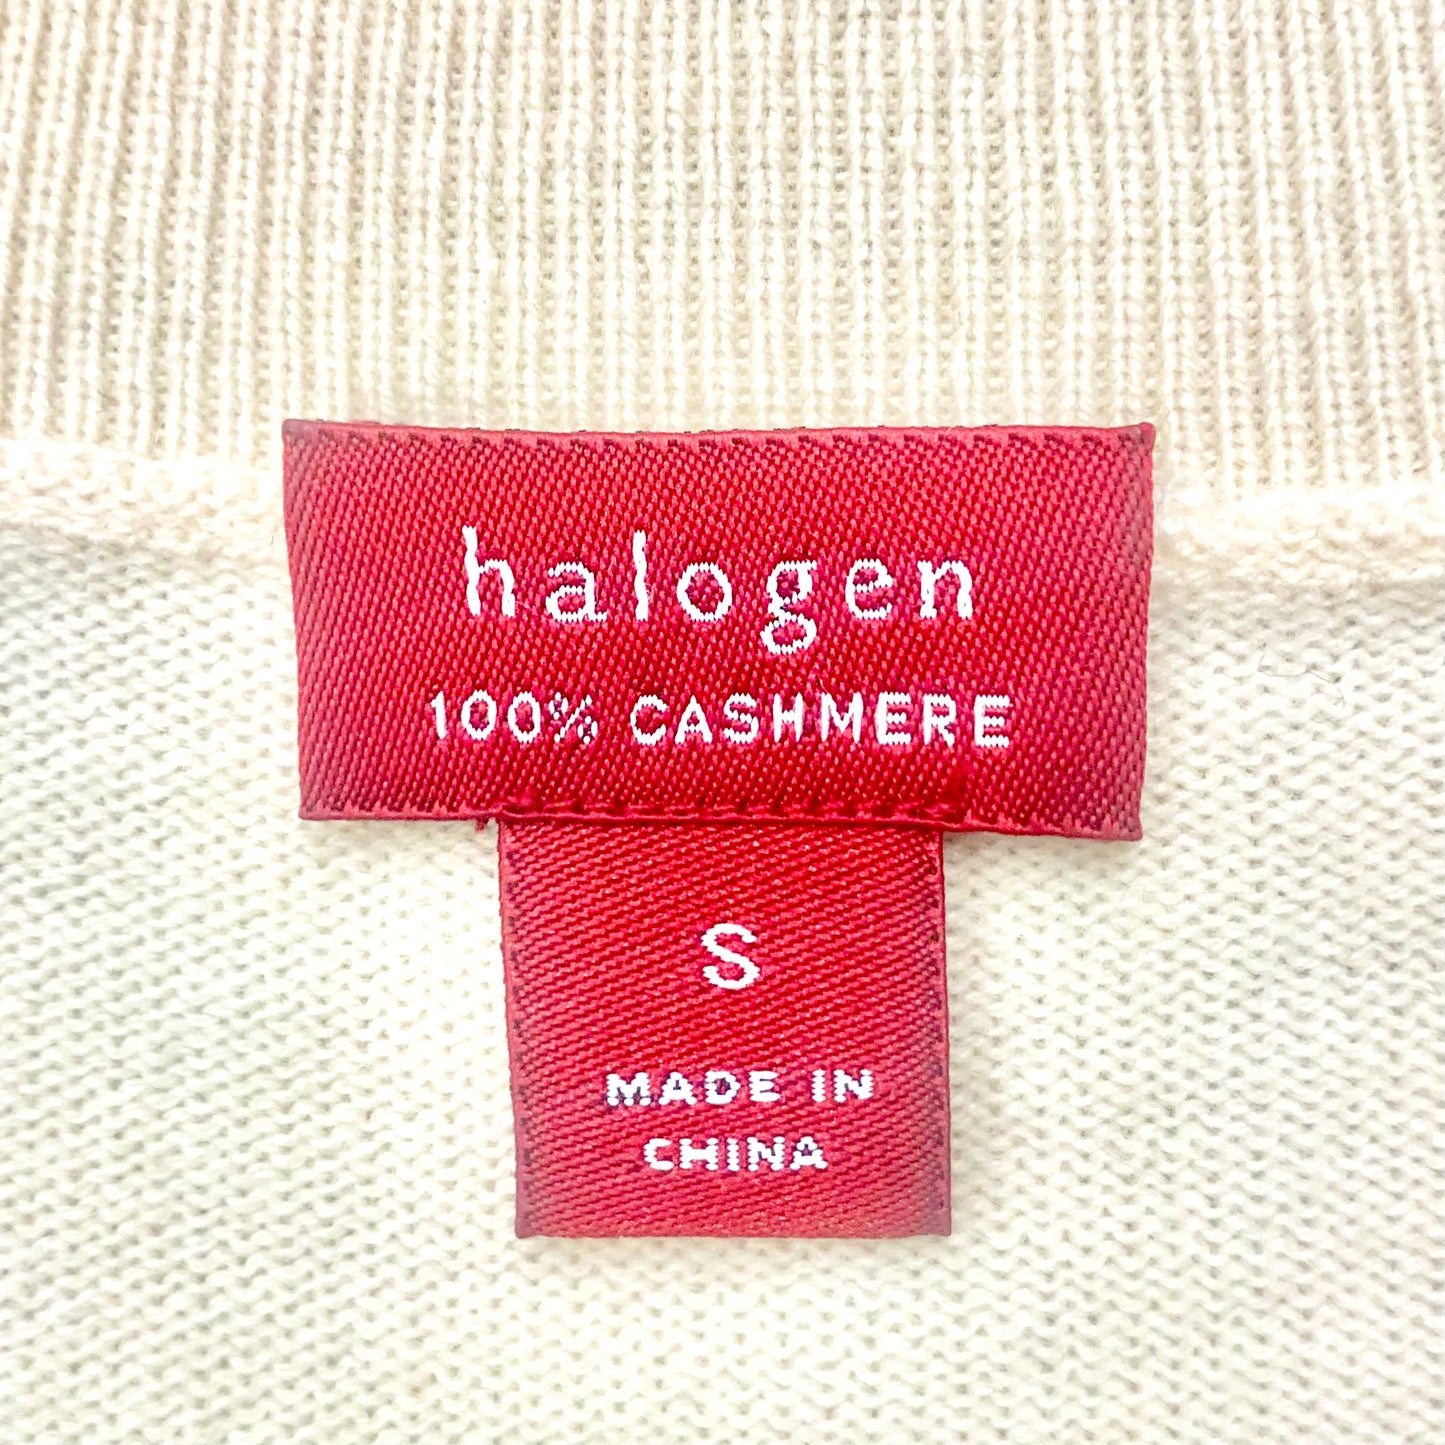 Sweater Cashmere By Halogen  Size: S